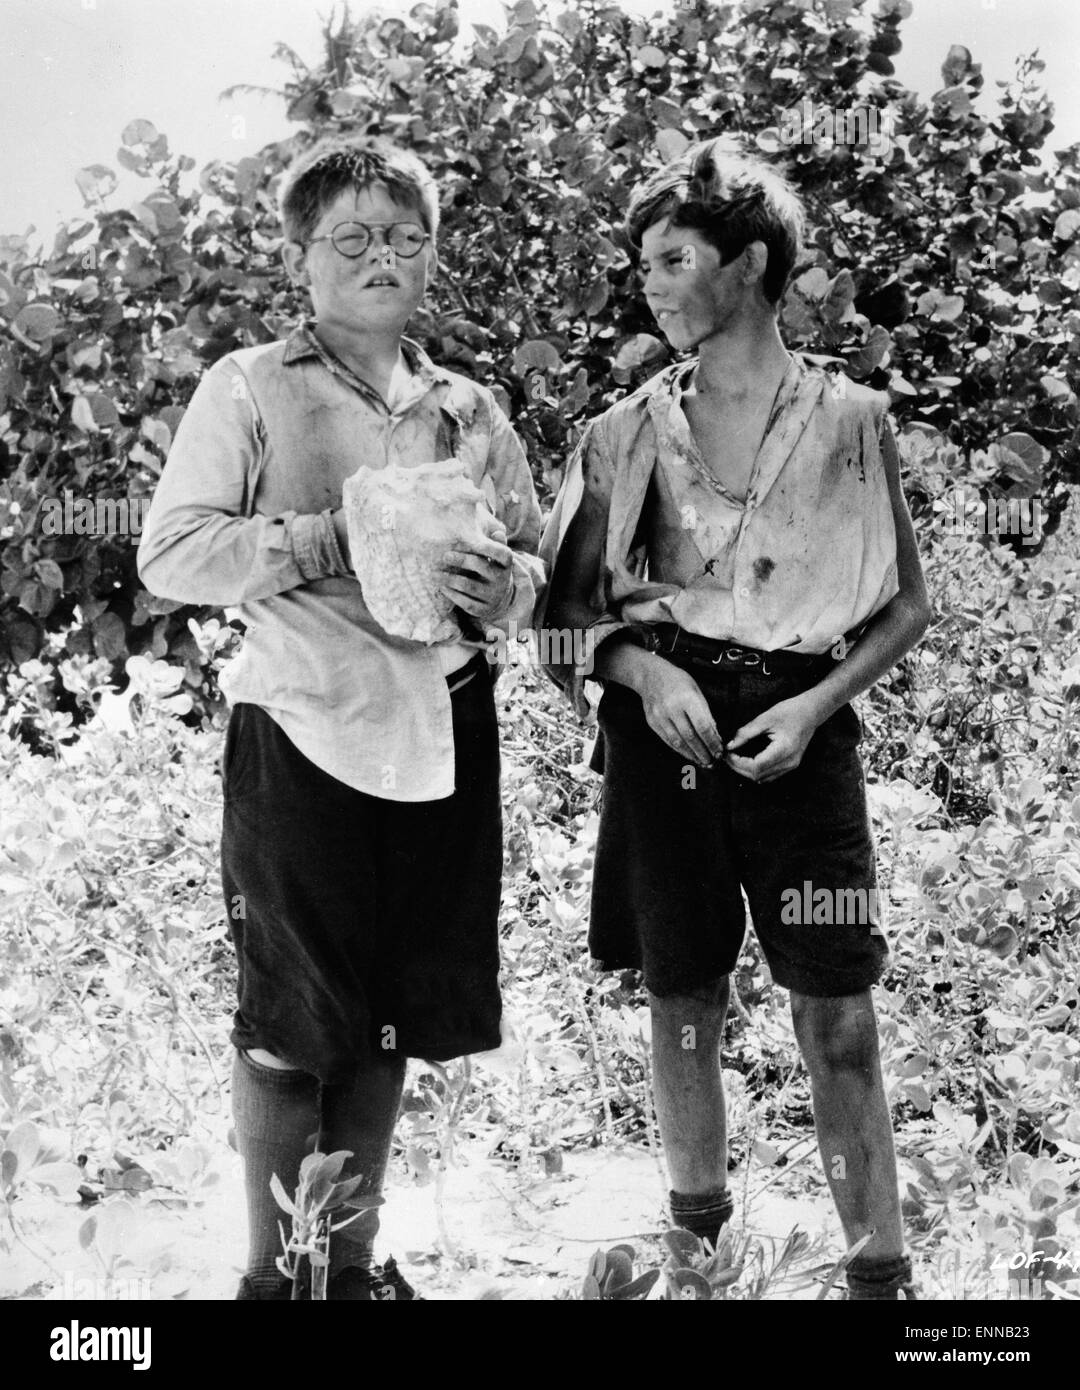 Lord of the flies 1963 Black and White Stock Photos & Images - Alamy